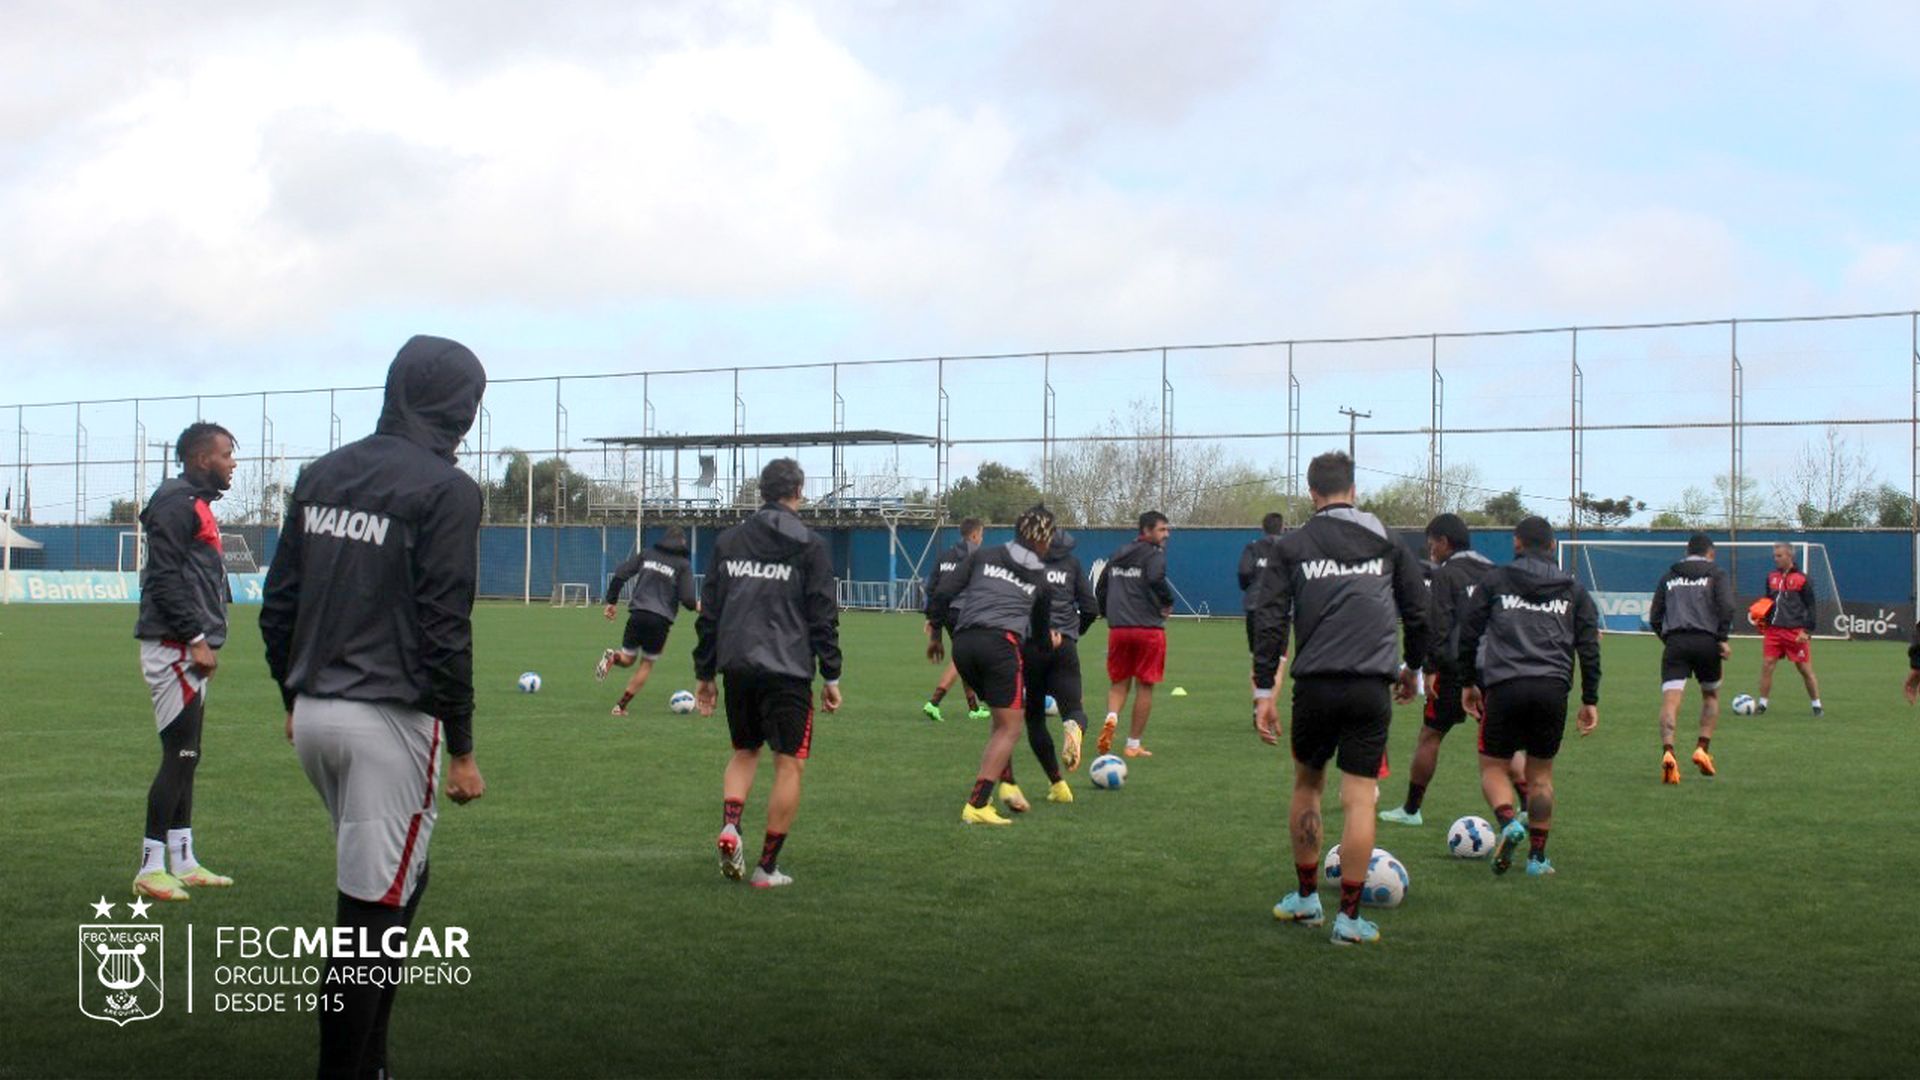 Melgar trained at the Porto Alegre Gremio sports center prior to the duel with Internacional for the South American Cup